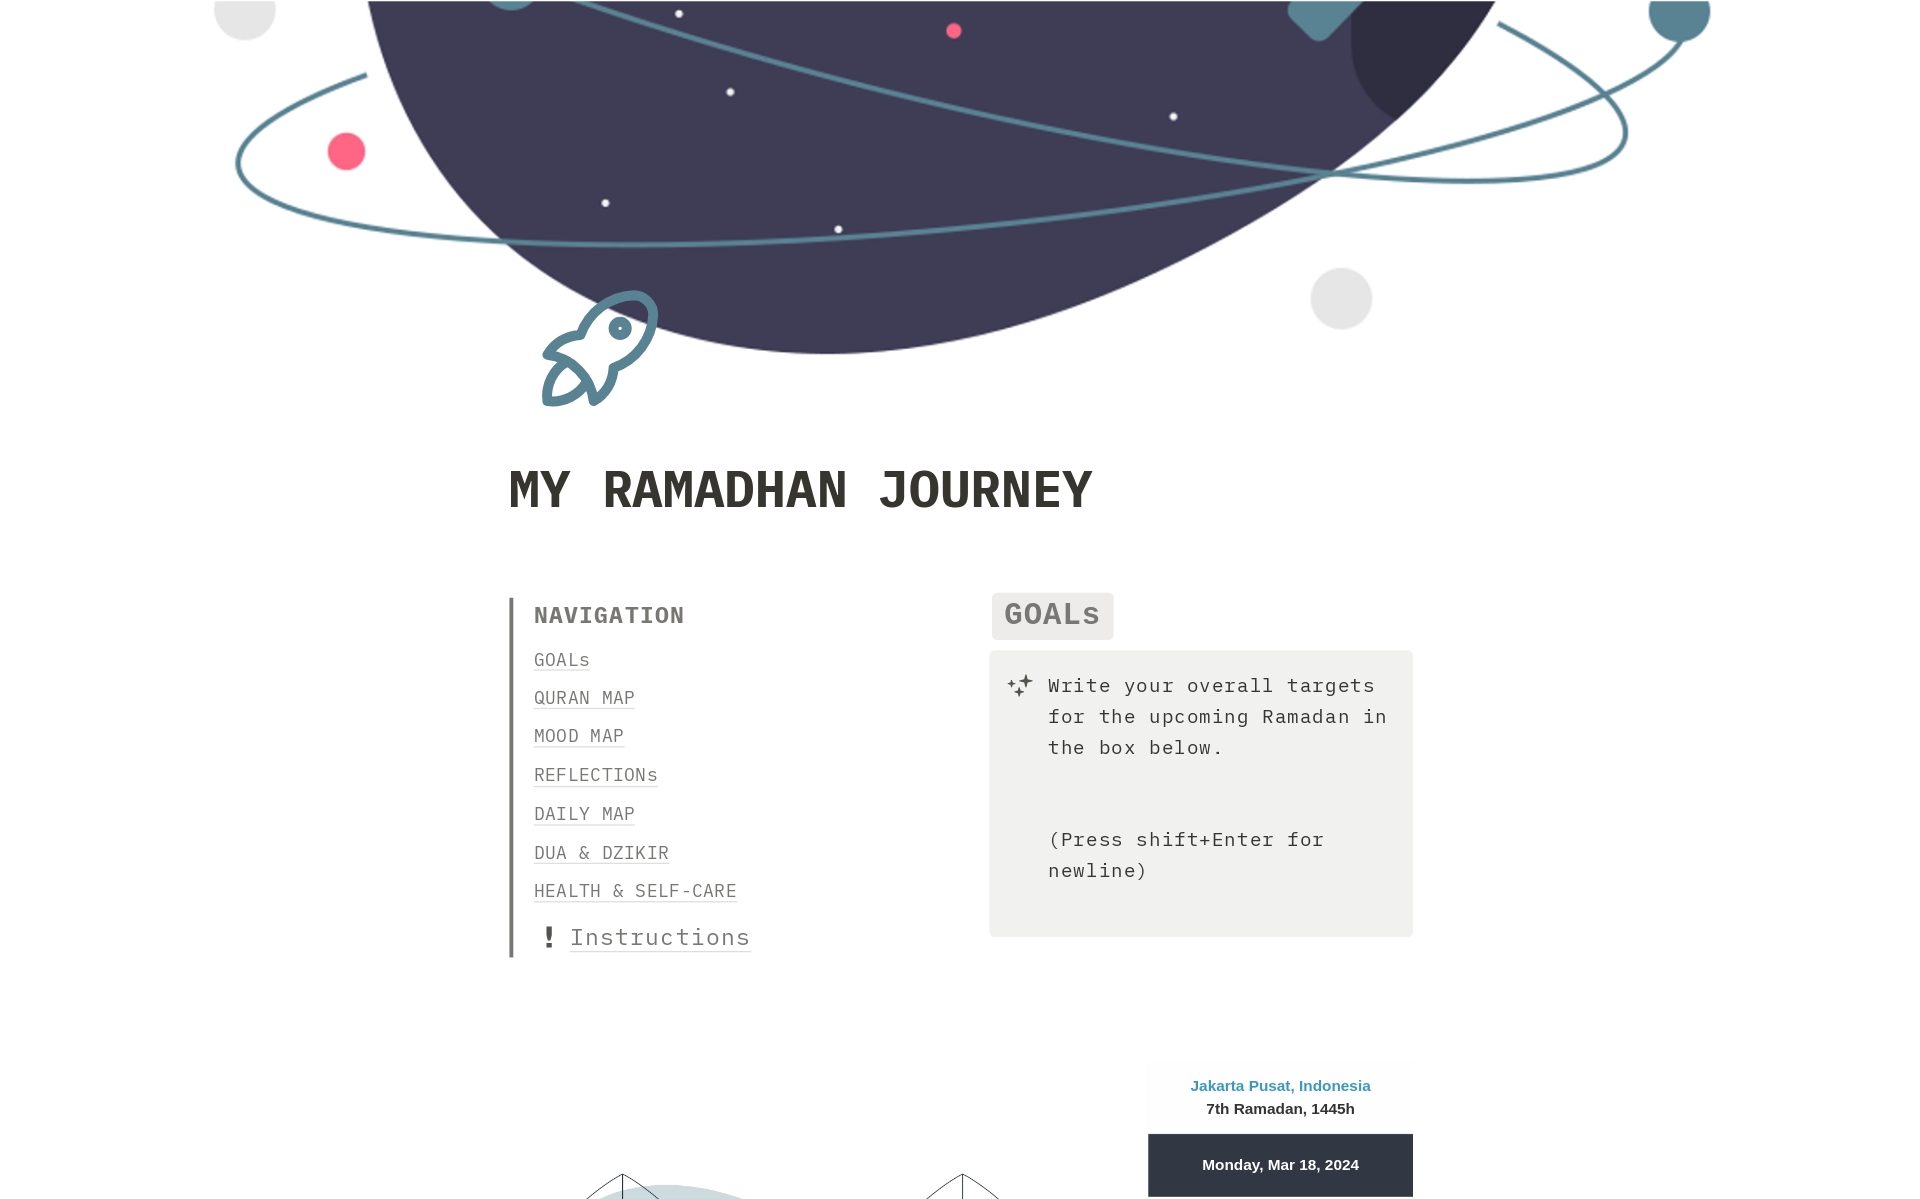 Get ready to embark on a transformative Ramadan journey like never before!
Have a smooth sailing Ramadhan!